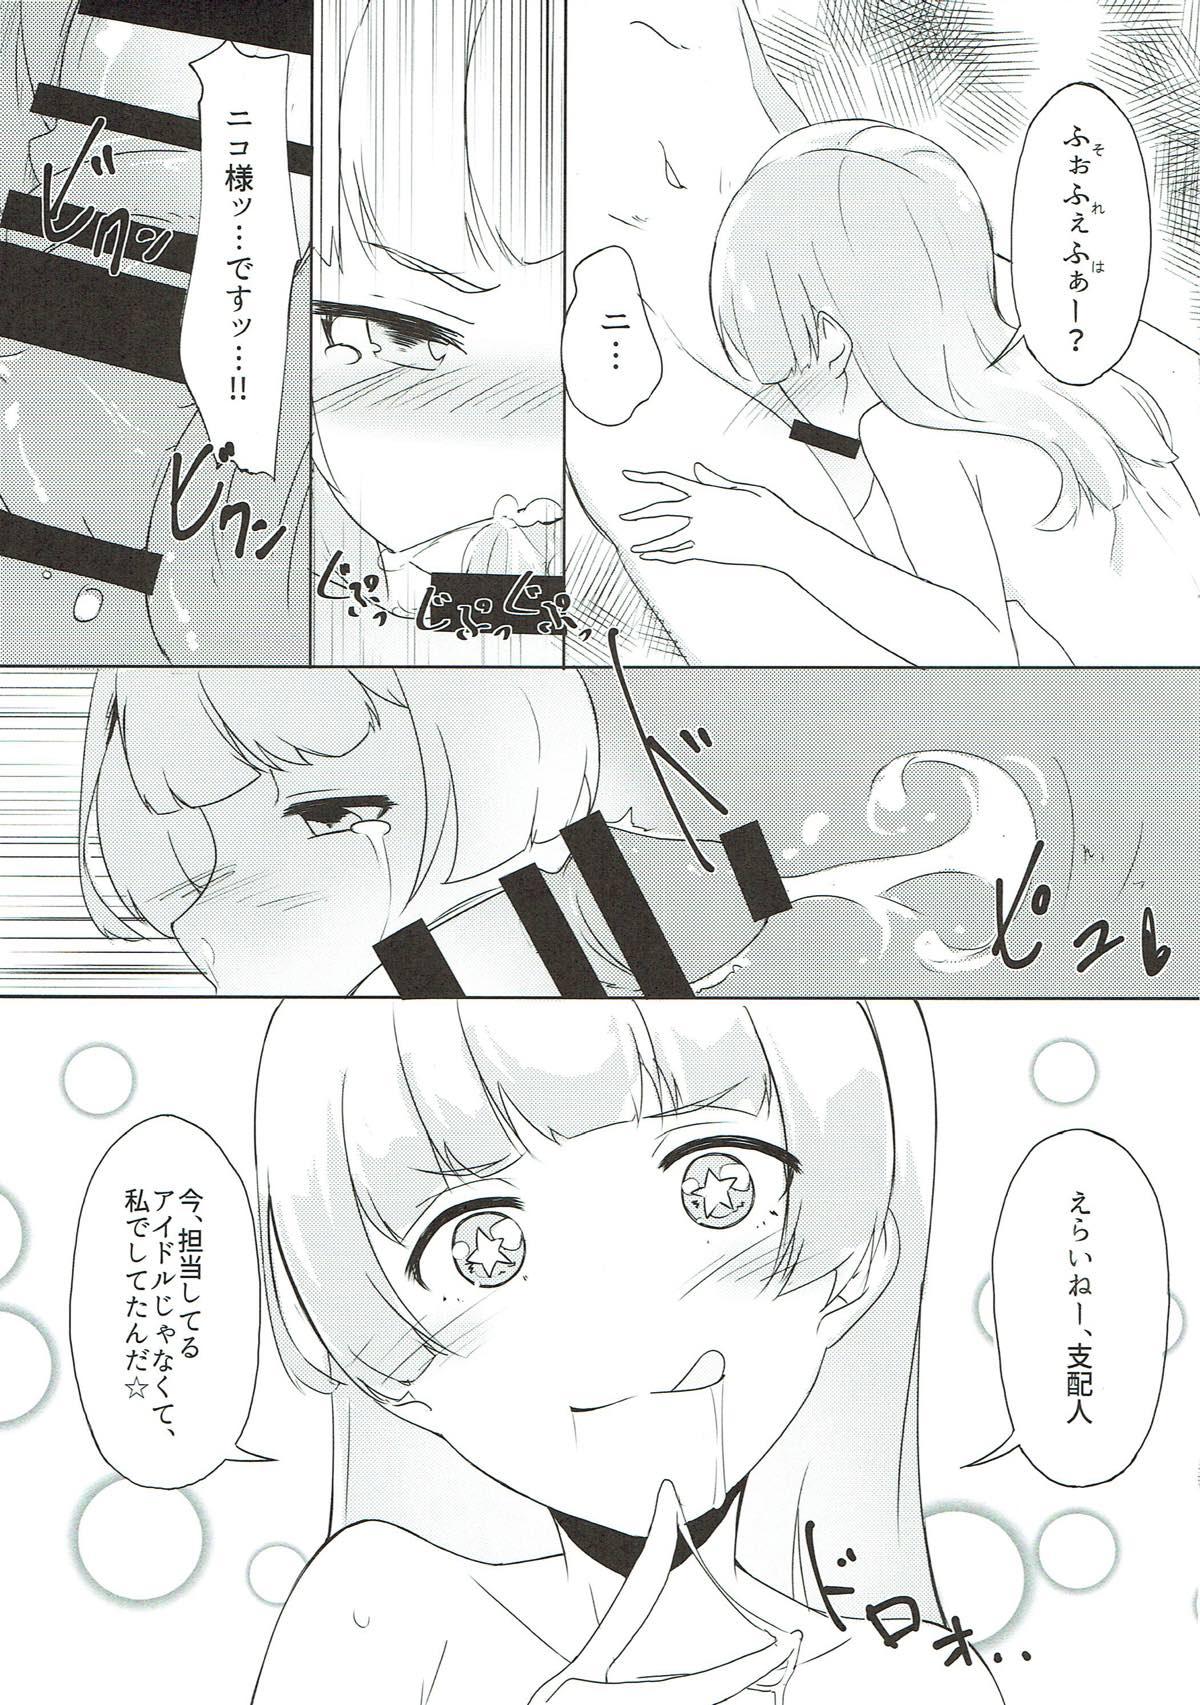 Shemale Terrorist Comes Home - Tokyo 7th sisters Masseuse - Page 6